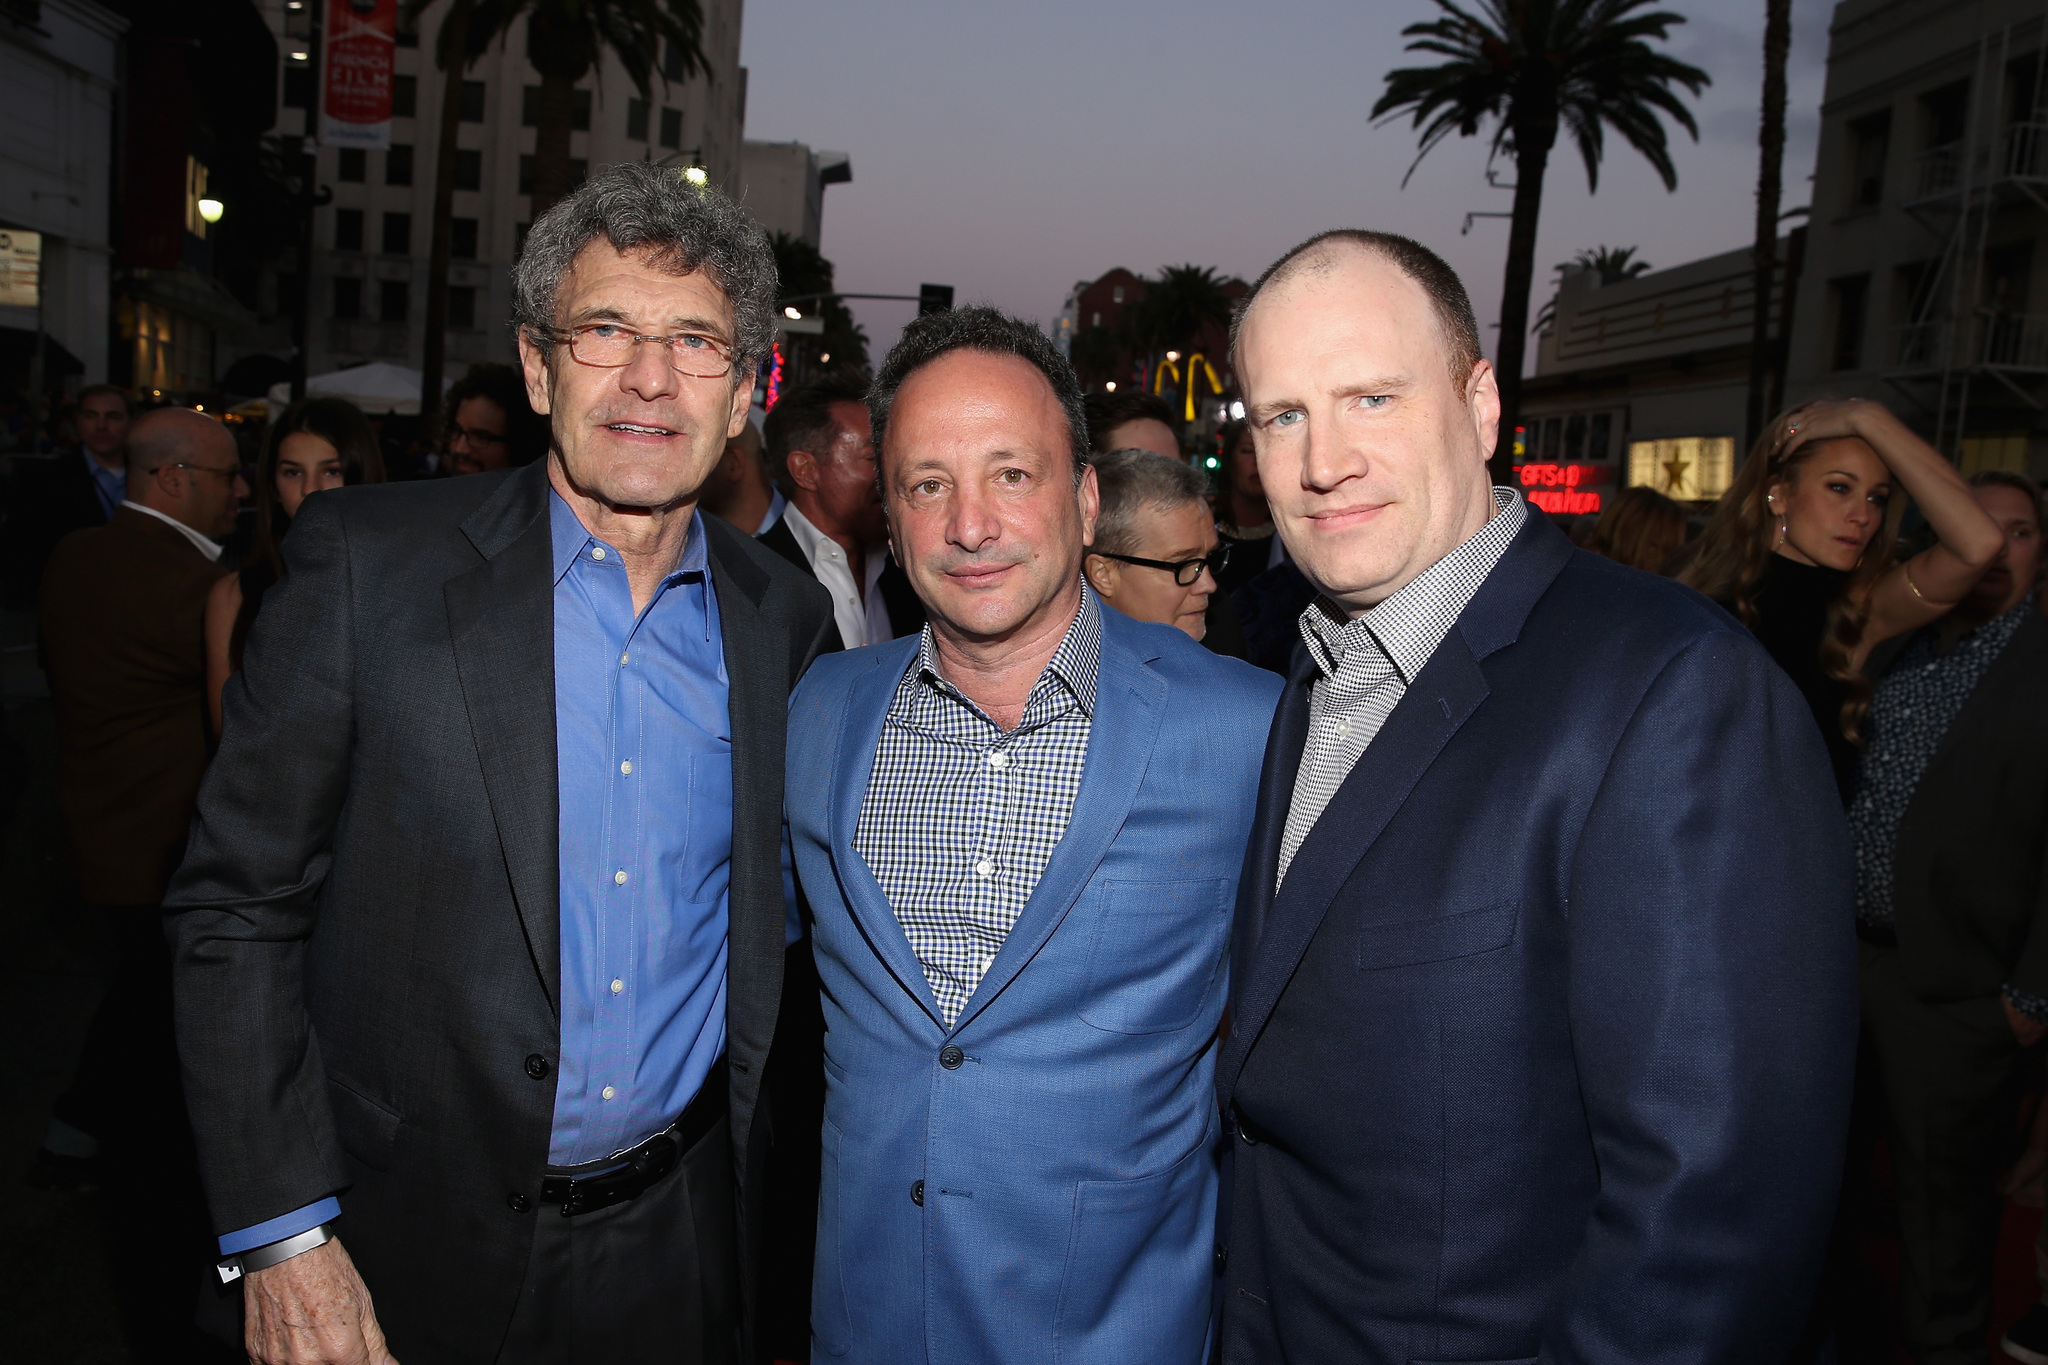 Louis D'Esposito, Kevin Feige and Alan Horn at event of Kersytojai 2 (2015)